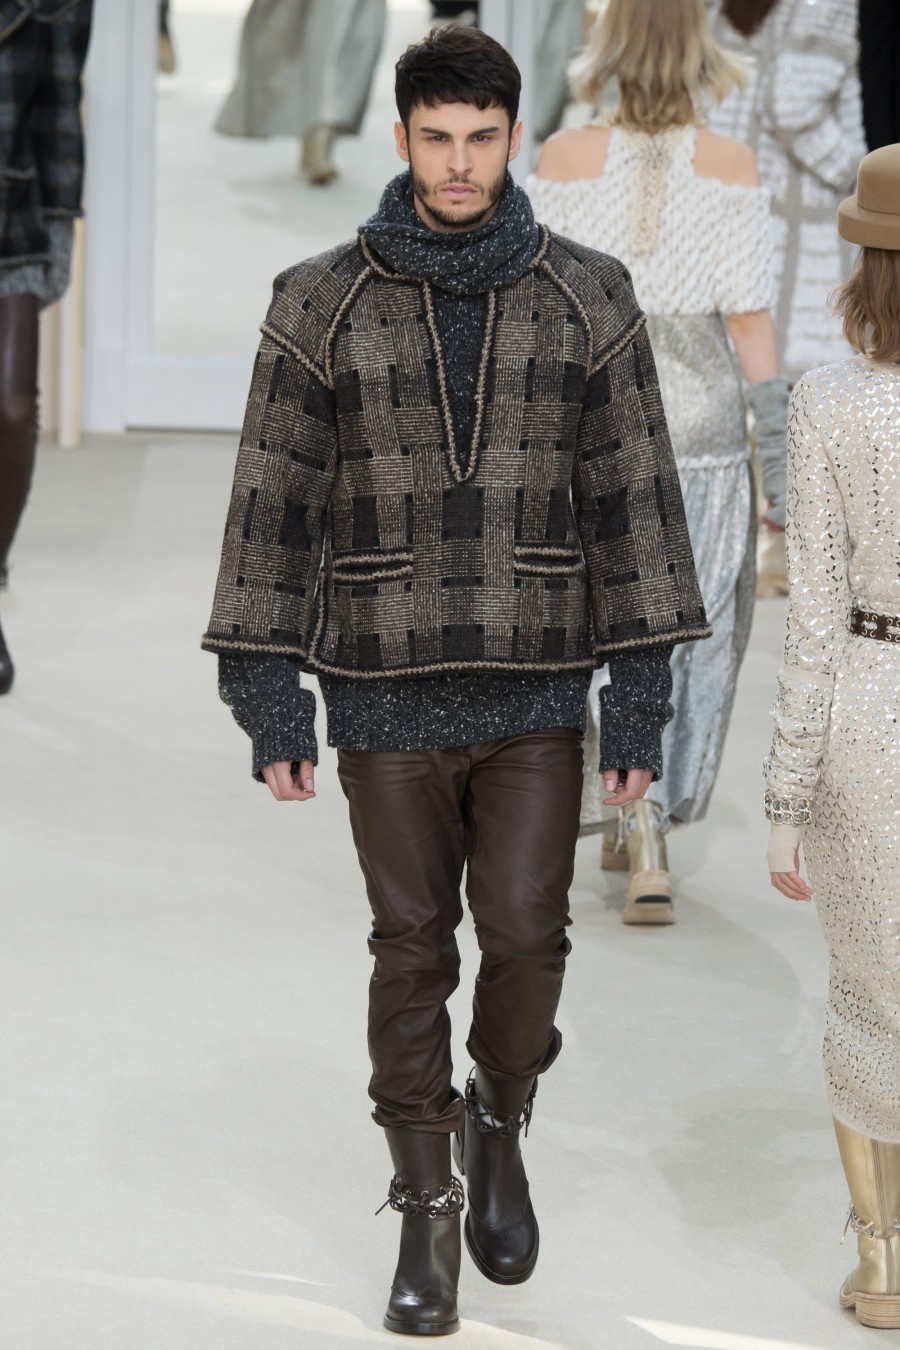 Chanel 2016 Fall/Winter Menswear Collection